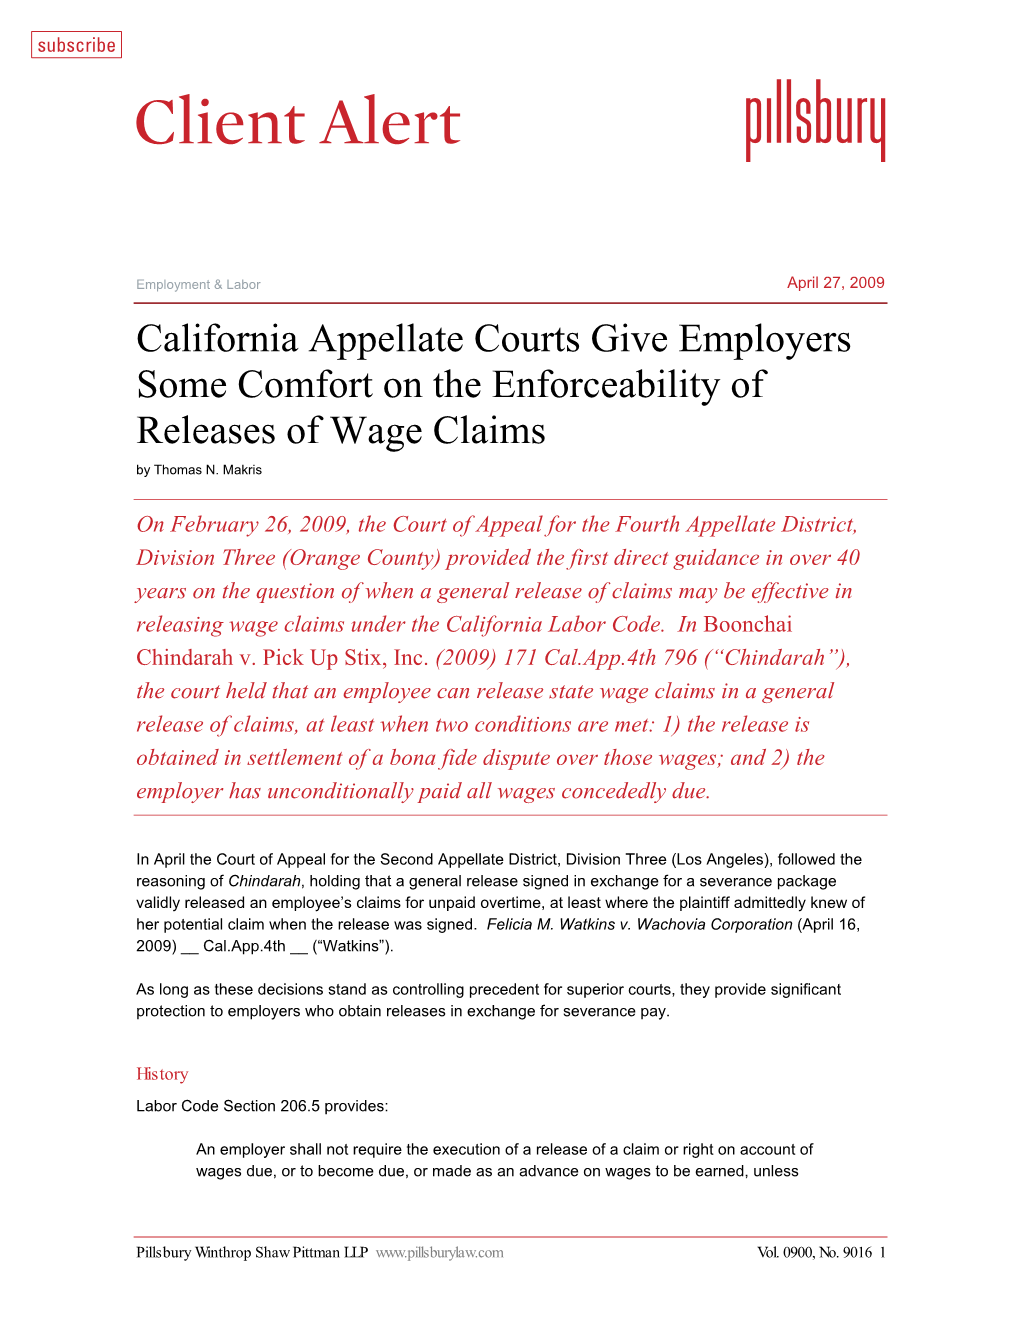 California Appellate Courts Give Employers Some Comfort on the Enforceability of Releases of Wage Claims by Thomas N